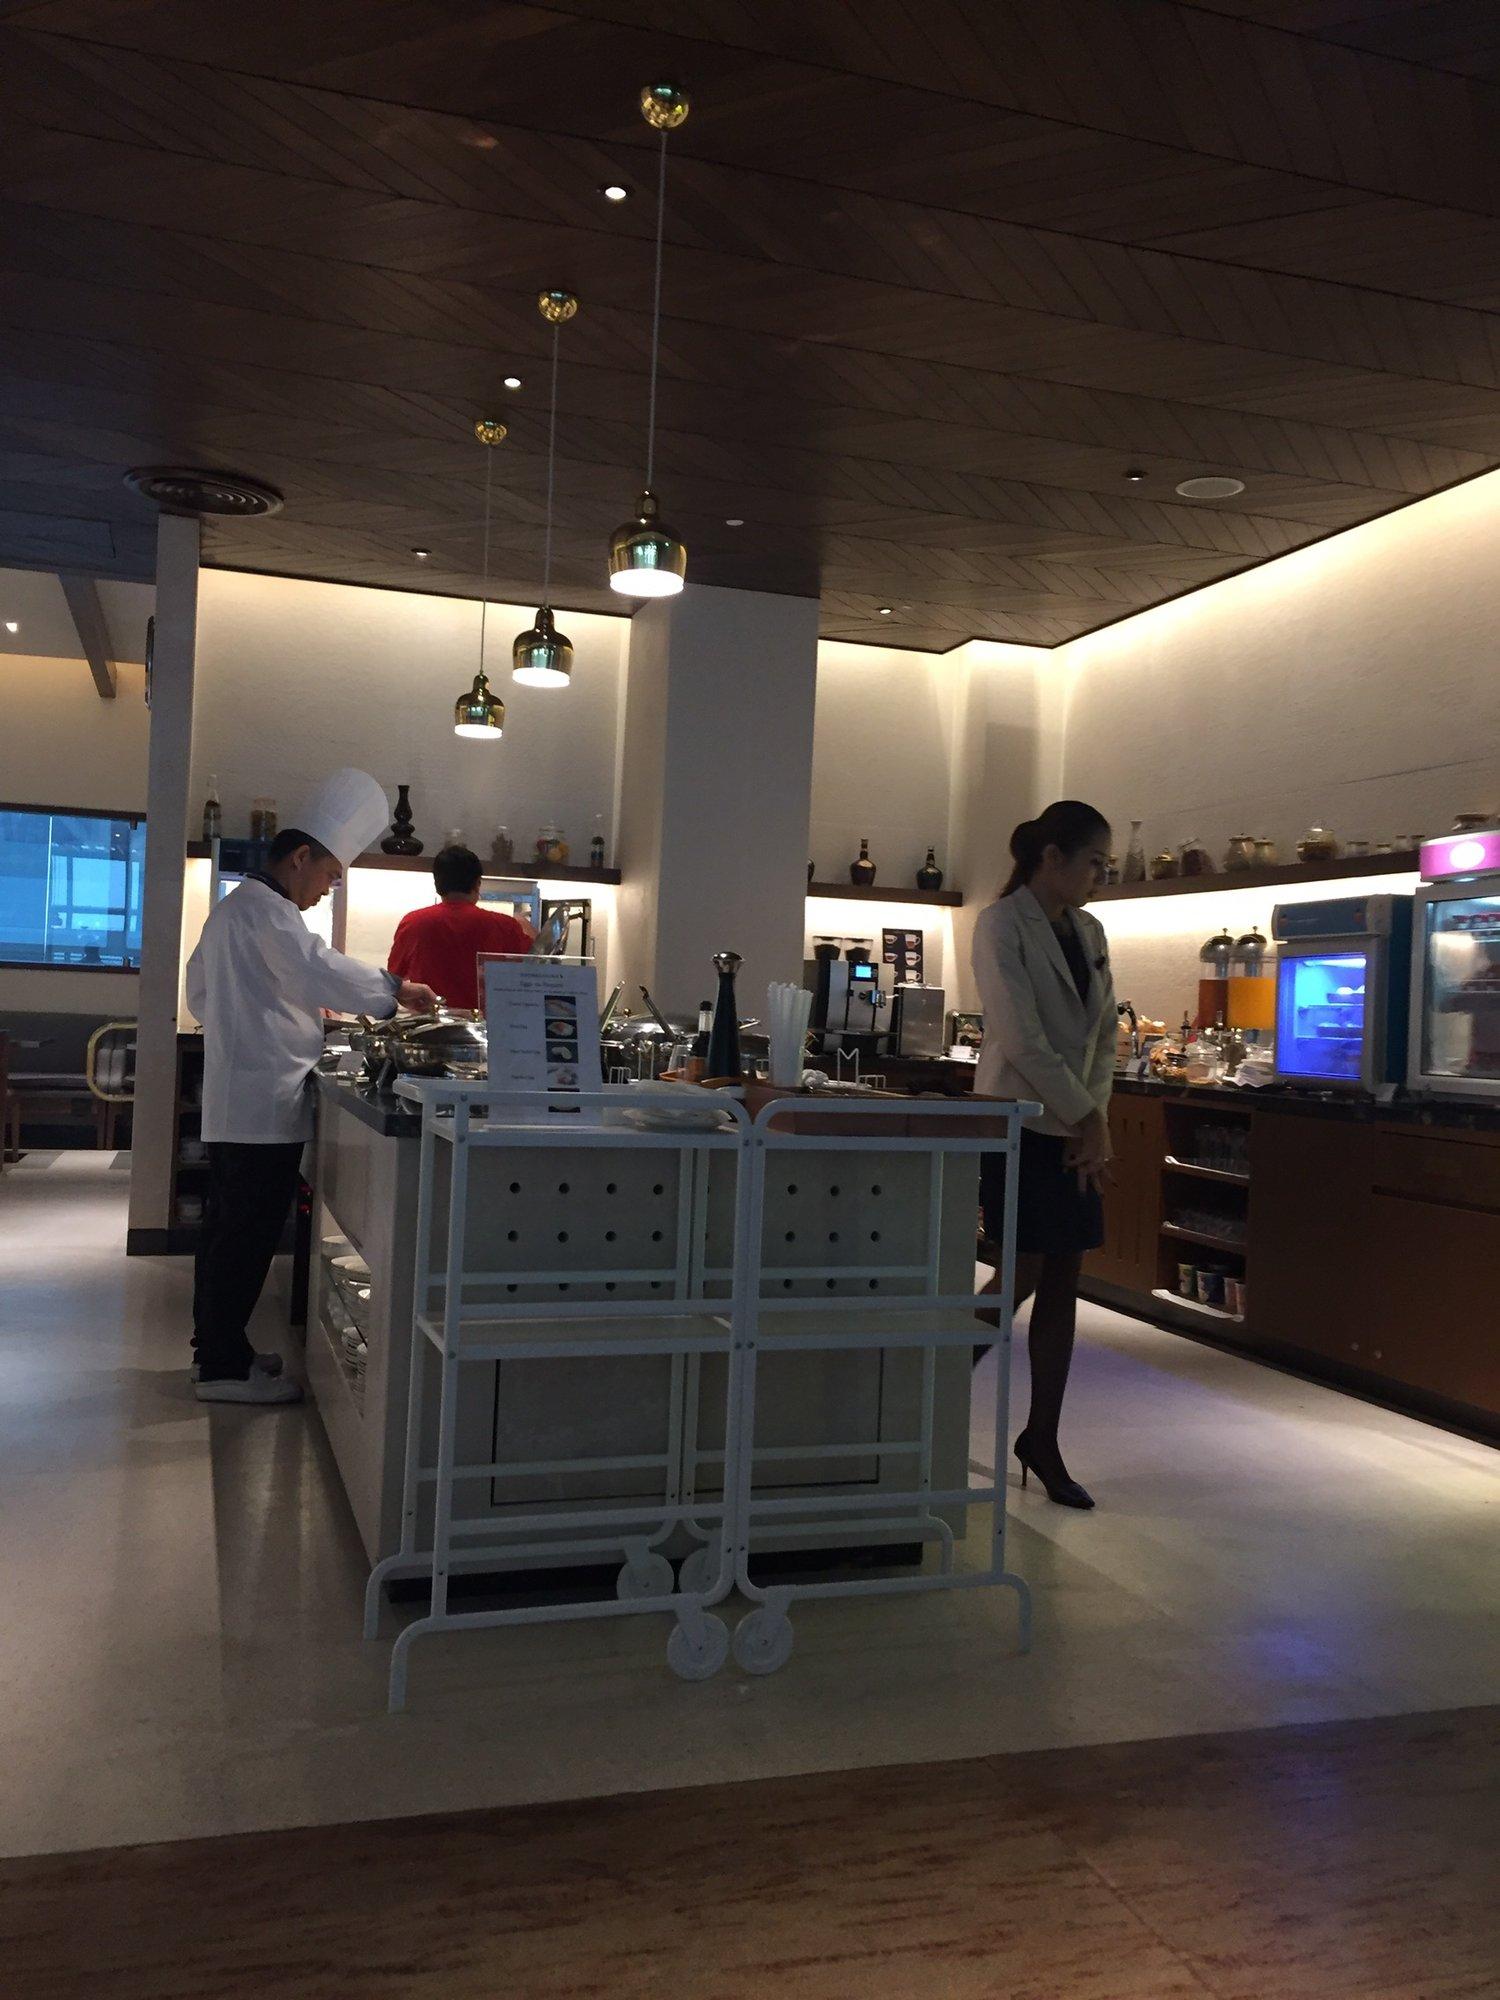 Singapore Airlines SilverKris Business Class Lounge image 6 of 16